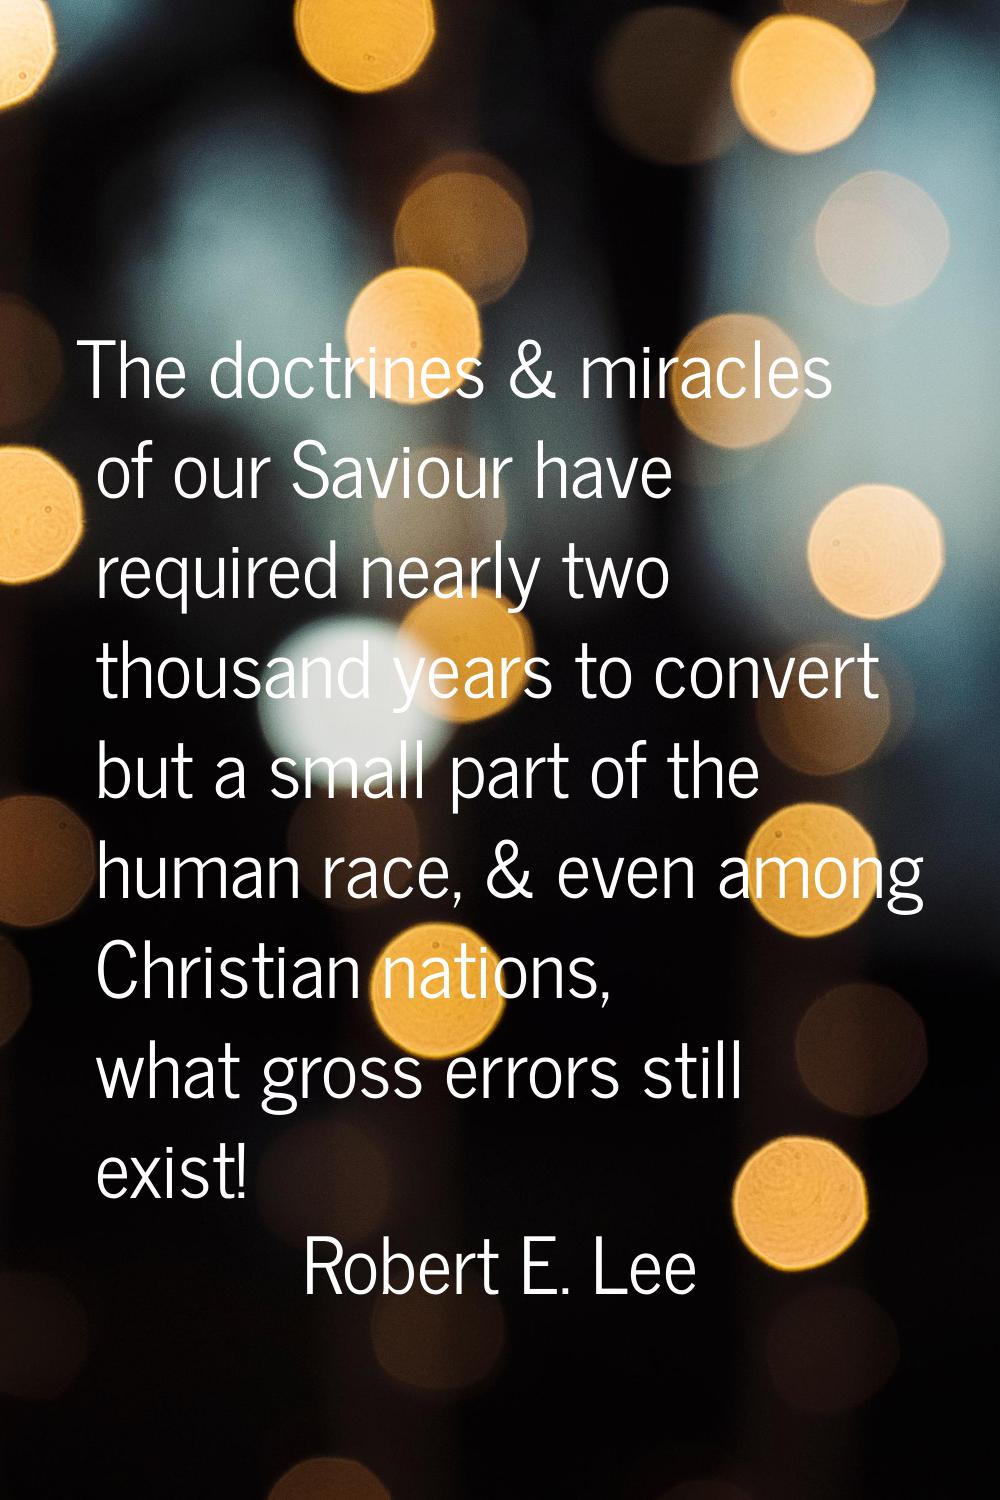 The doctrines & miracles of our Saviour have required nearly two thousand years to convert but a sm